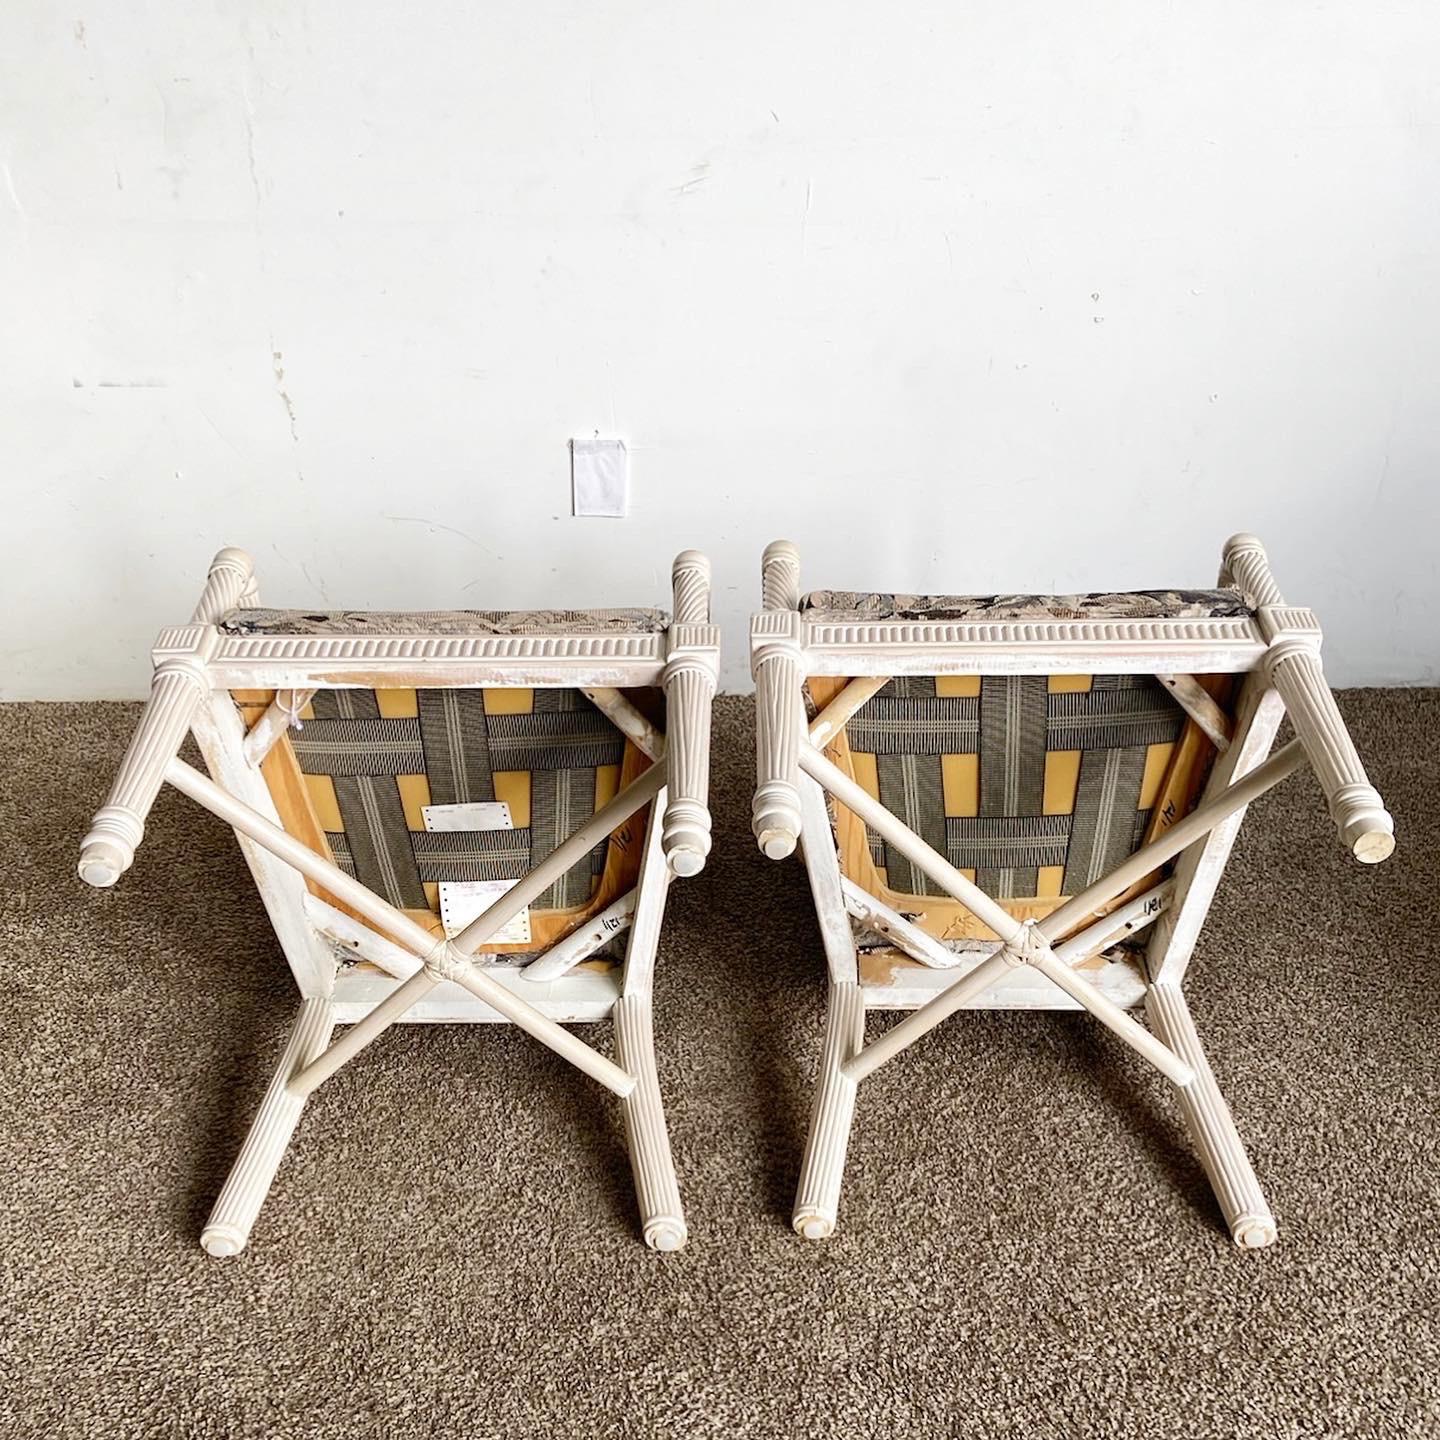 Late 20th Century Boho Chic White Washed Pencil Reed Armchairs - a Pair For Sale